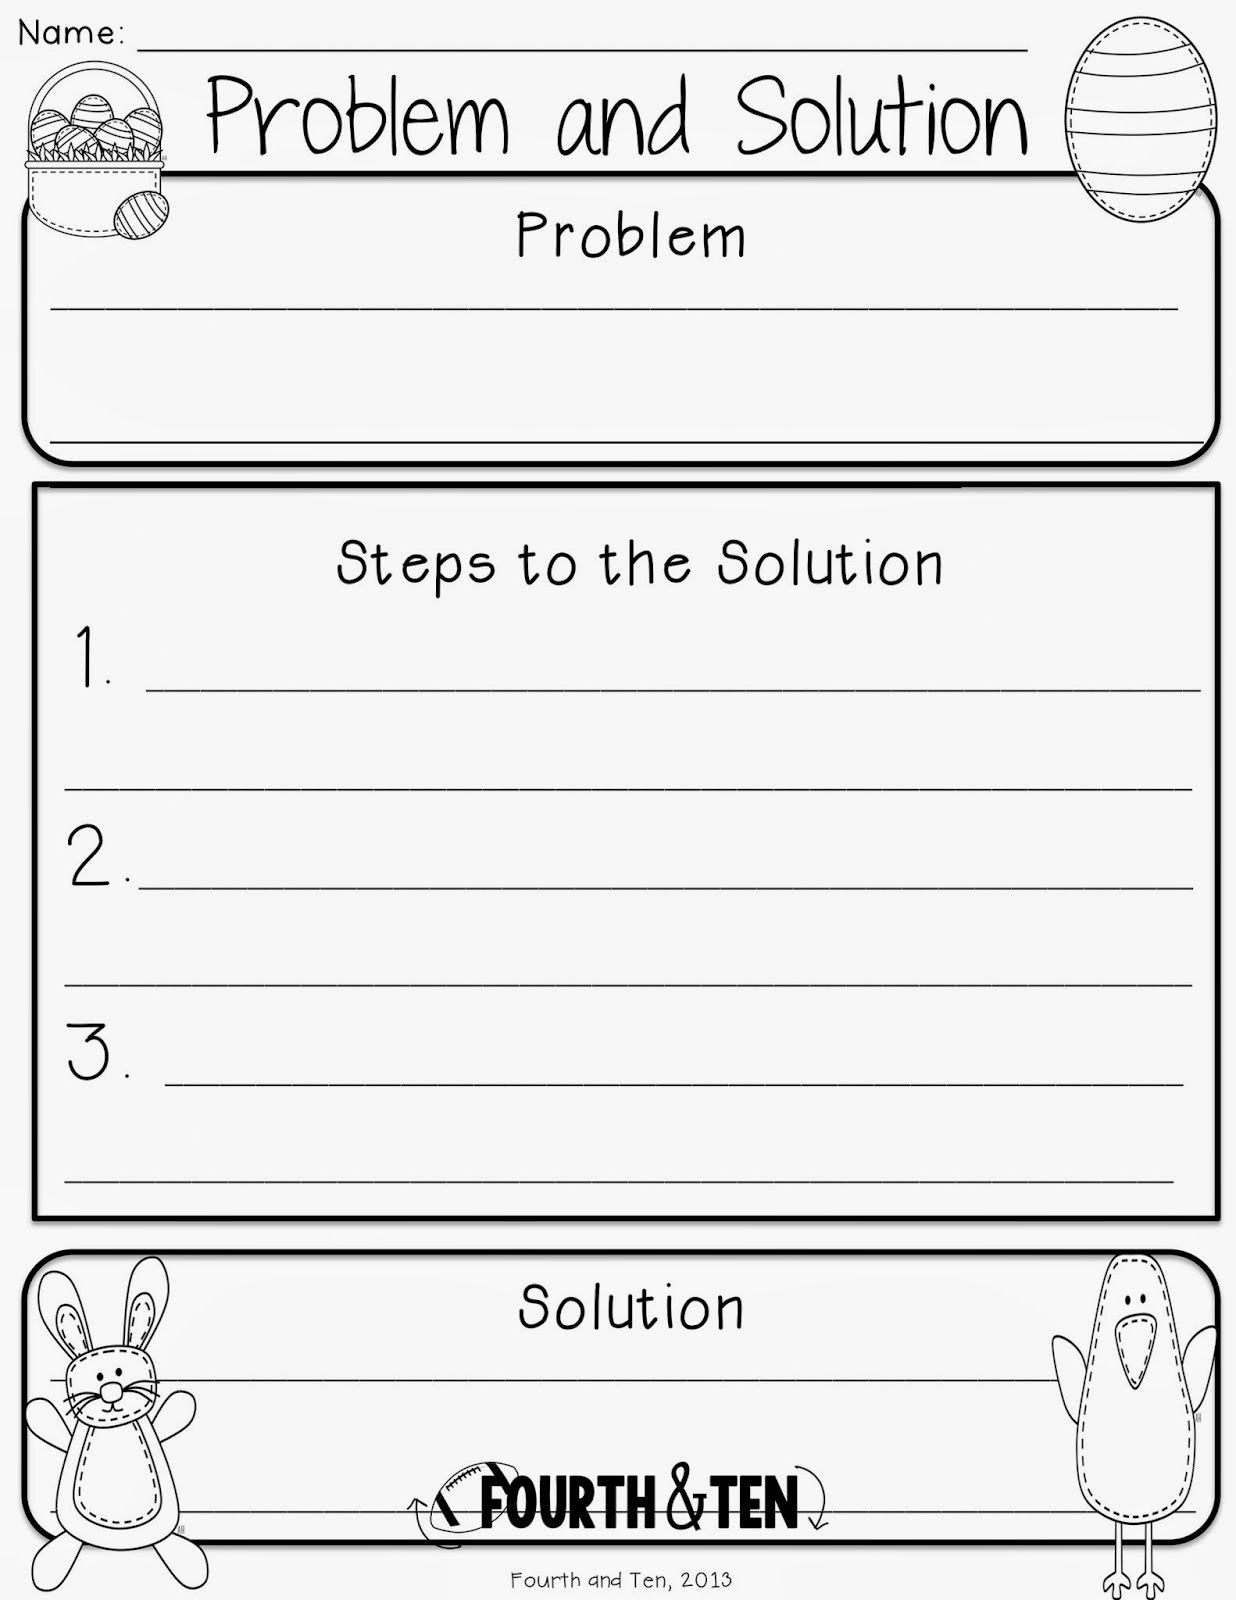 Problem and solution Worksheet Easter Graphic organizers Reading Writing Problem